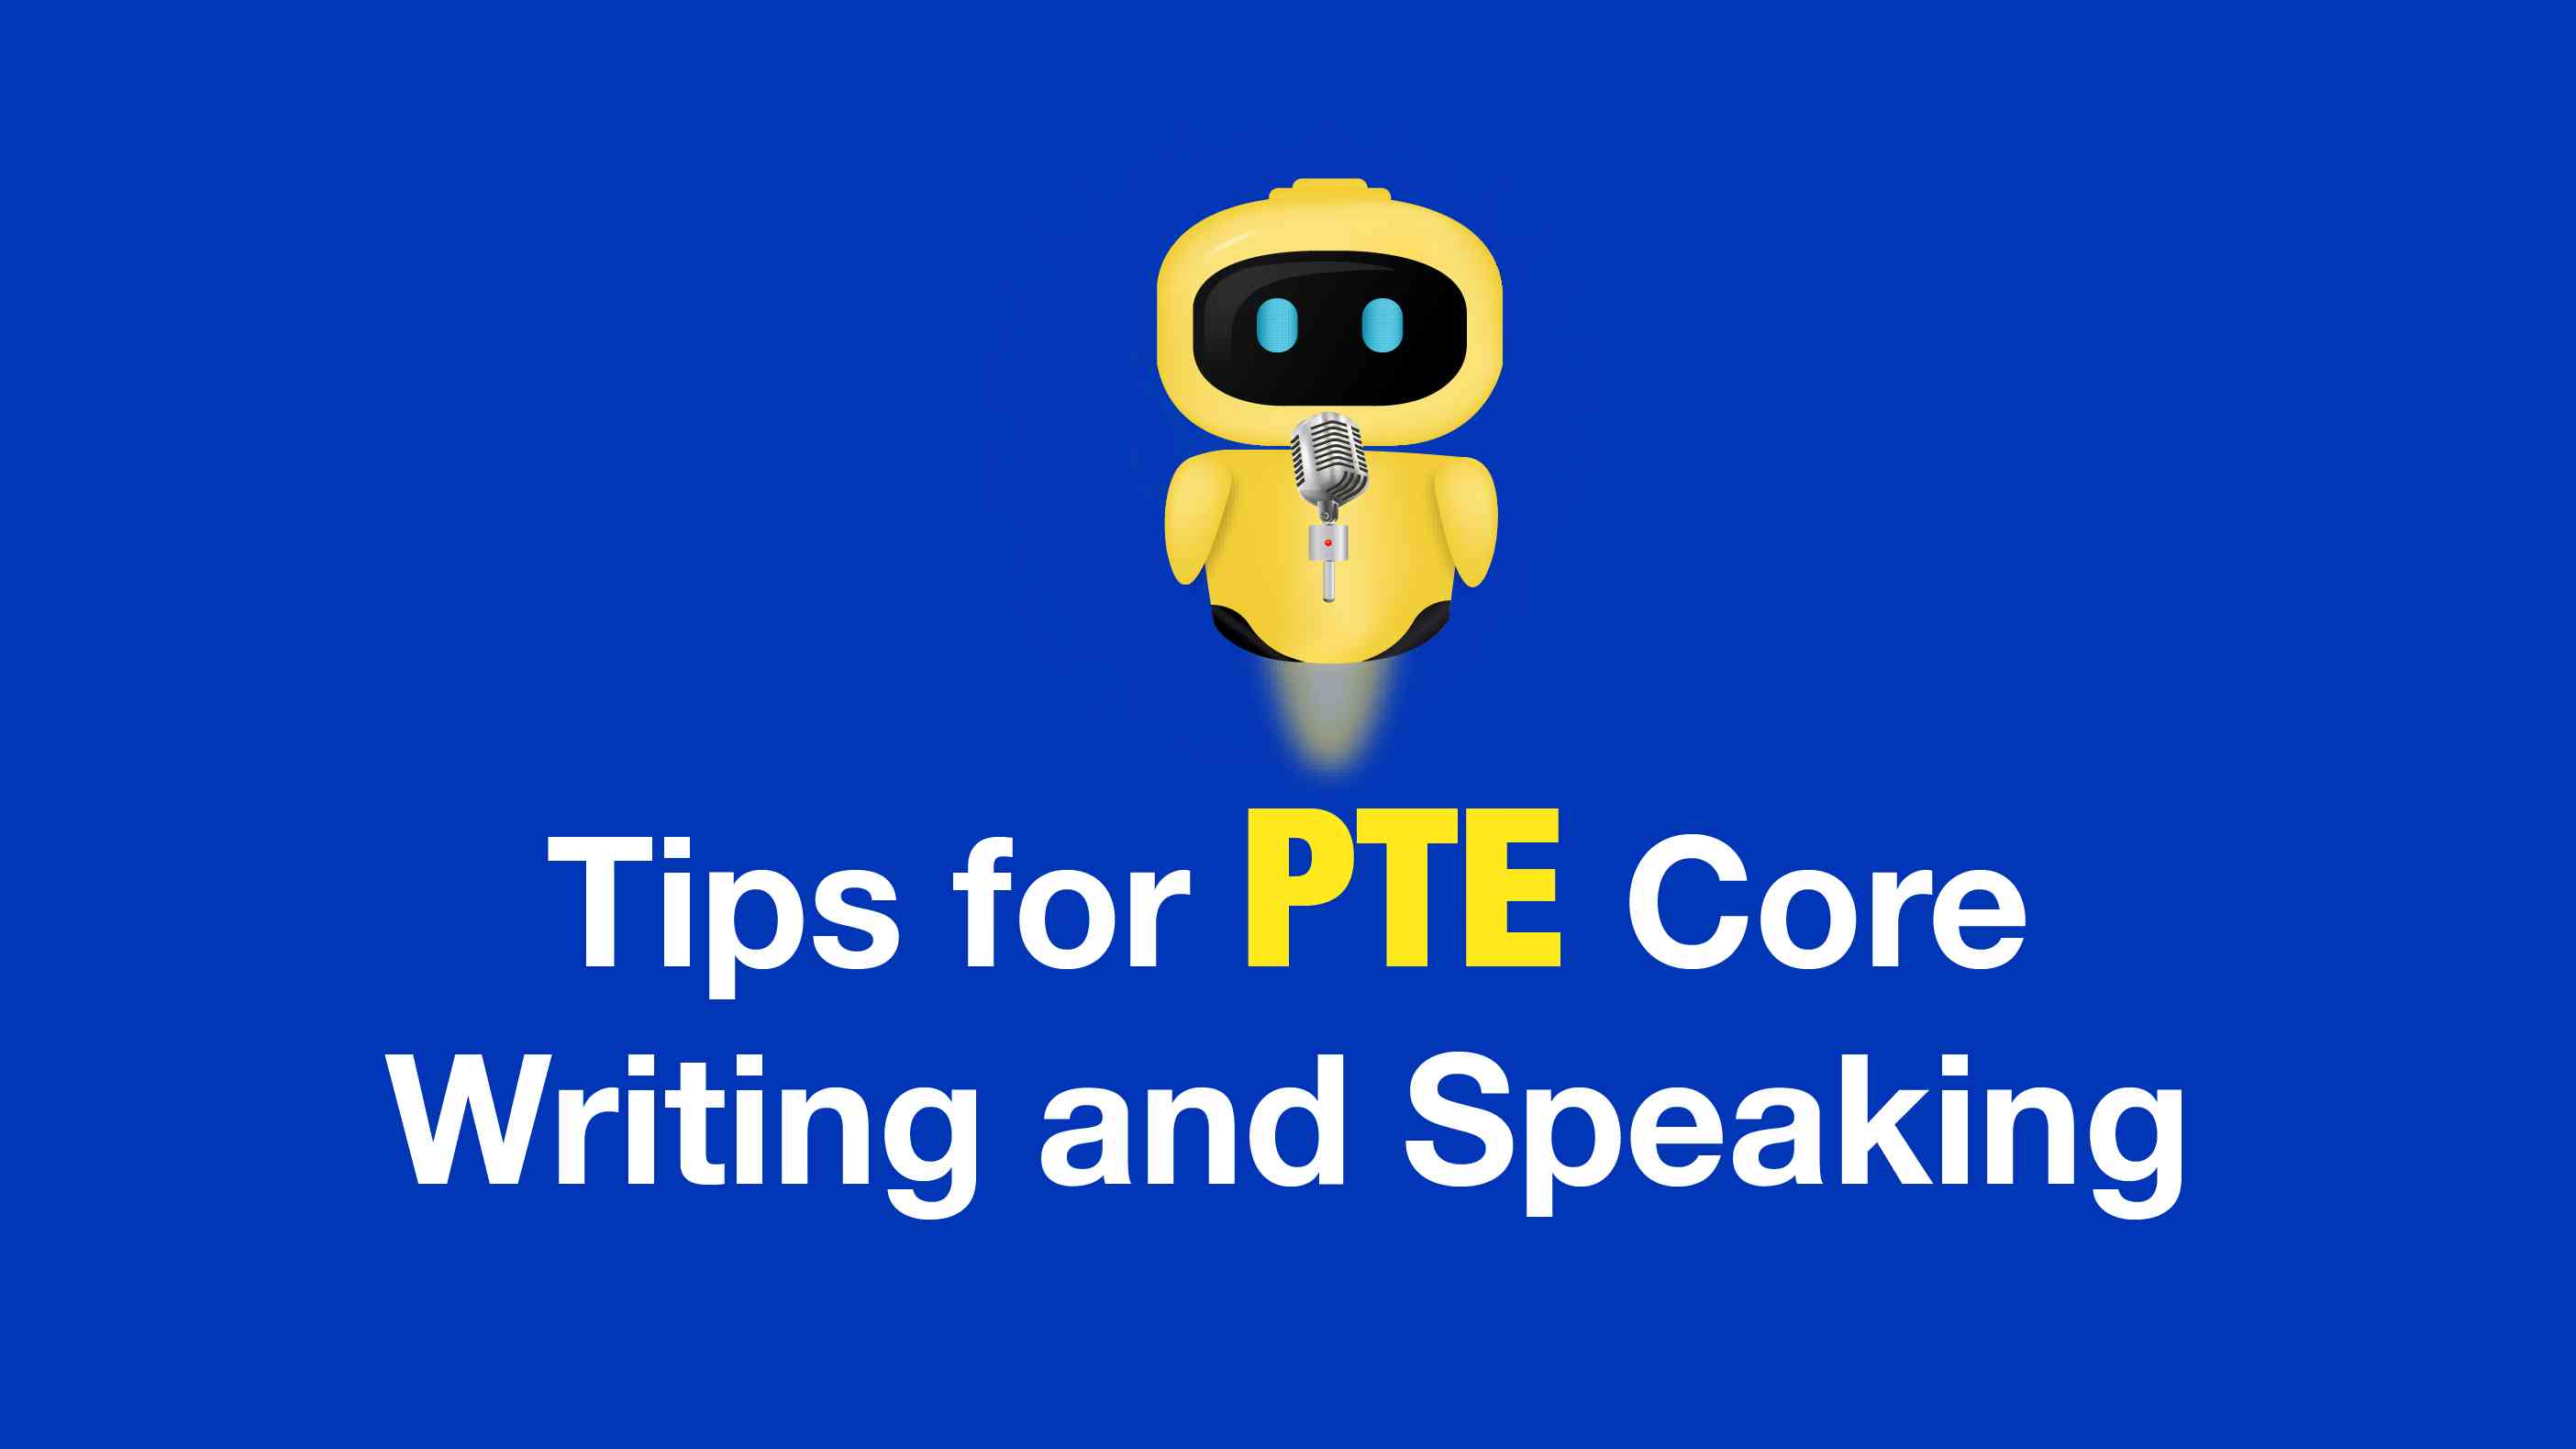 PTE Core Preparation: Speaking and Writing Segment